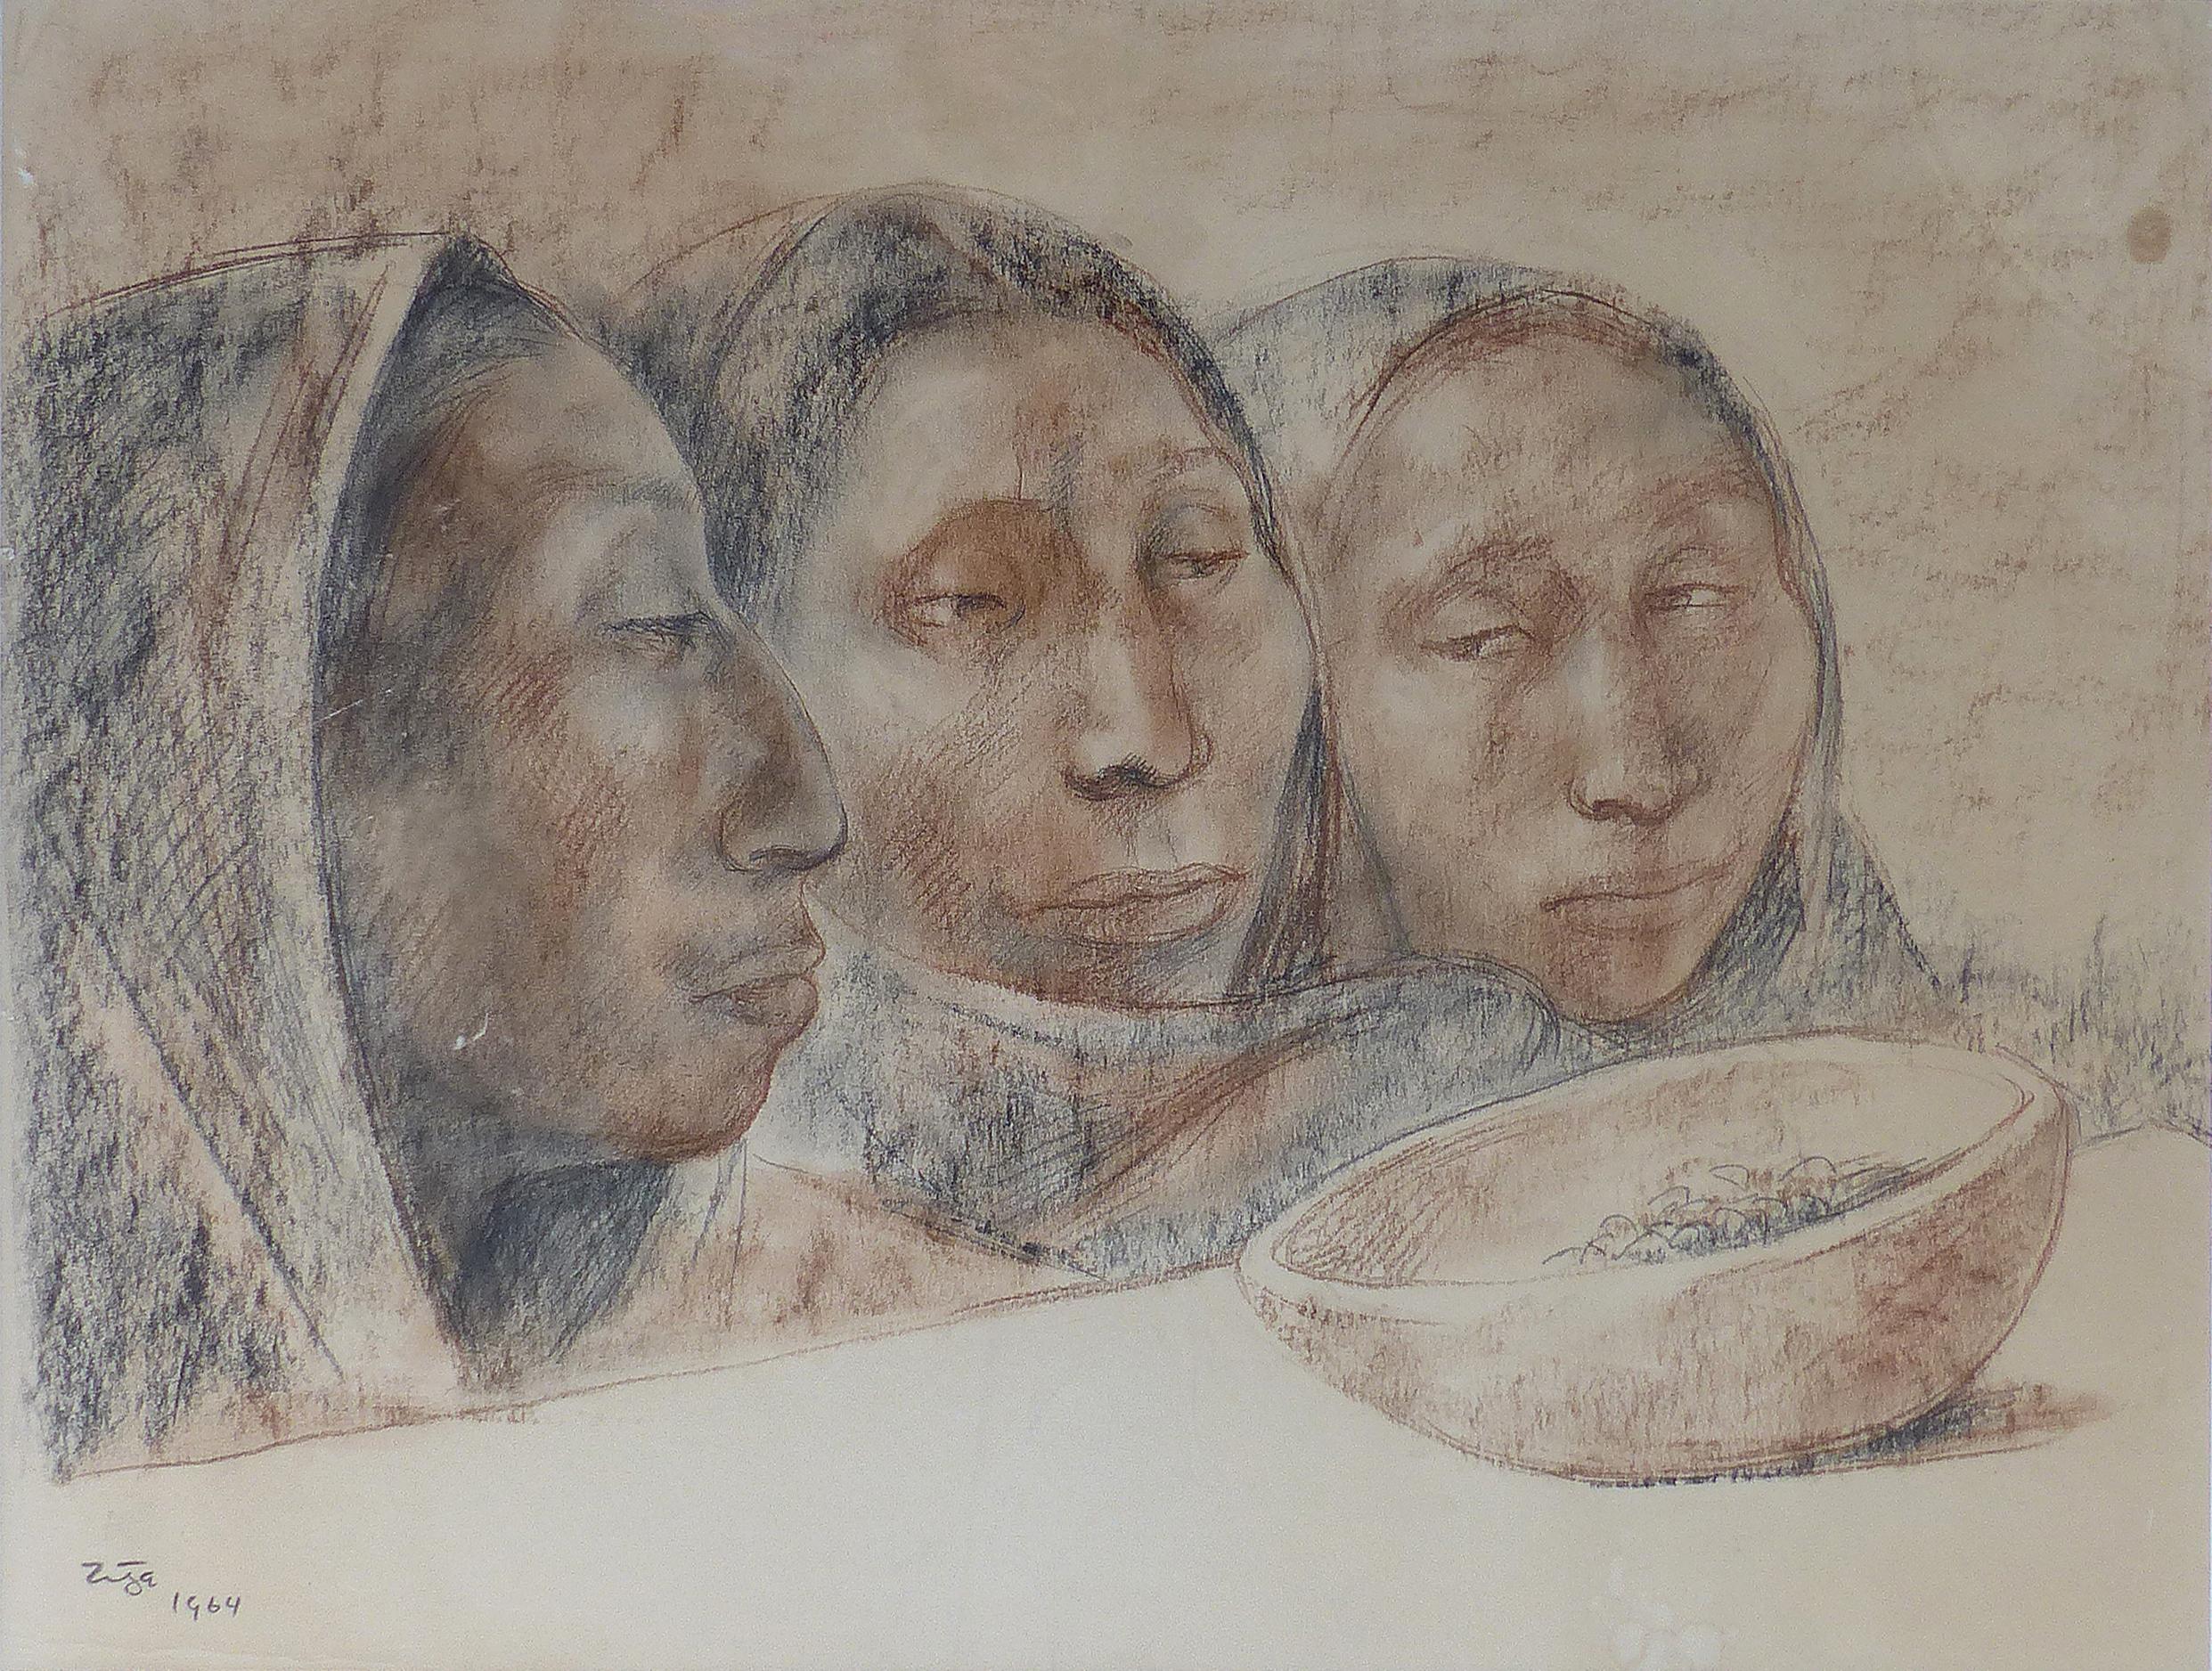 Francisco Zúñiga Charcoal and Pastel Drawing on Paper, 1964

Offered for sale is an original charcoal drawing with pastels by the well listed Costa Rican/Mexican artist Francisco Zúñiga (1912-1988) signed and dated 1964. This drawing depicts three